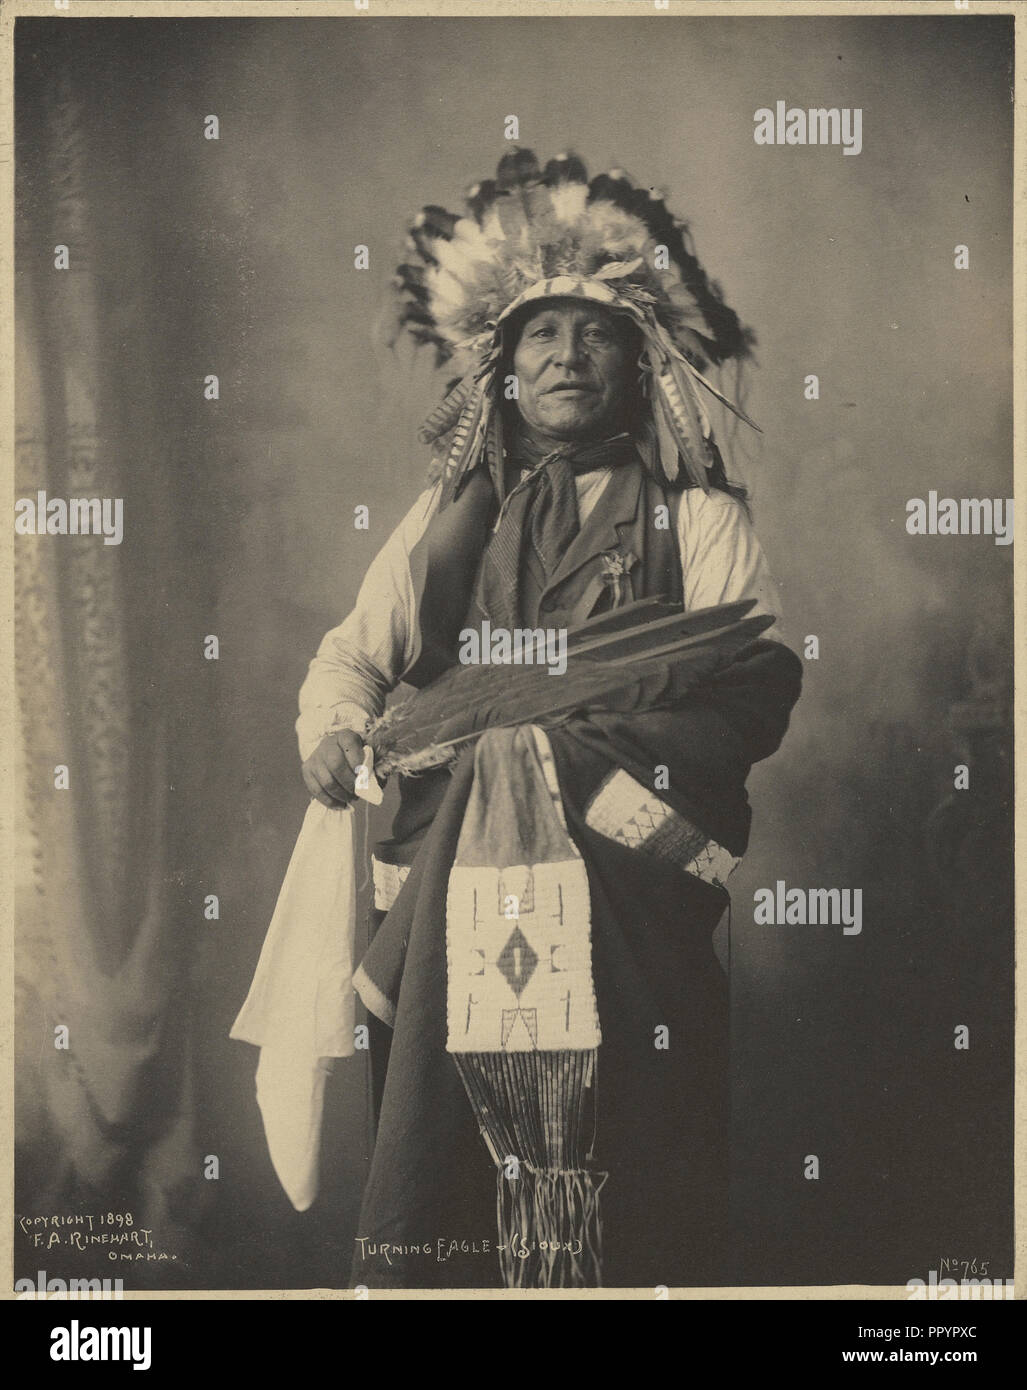 Turning Eagle, Sioux; Adolph F. Muhr, American, died 1913, Frank A. Rinehart, American, 1861 - 1928, 1898; Platinum print Stock Photo